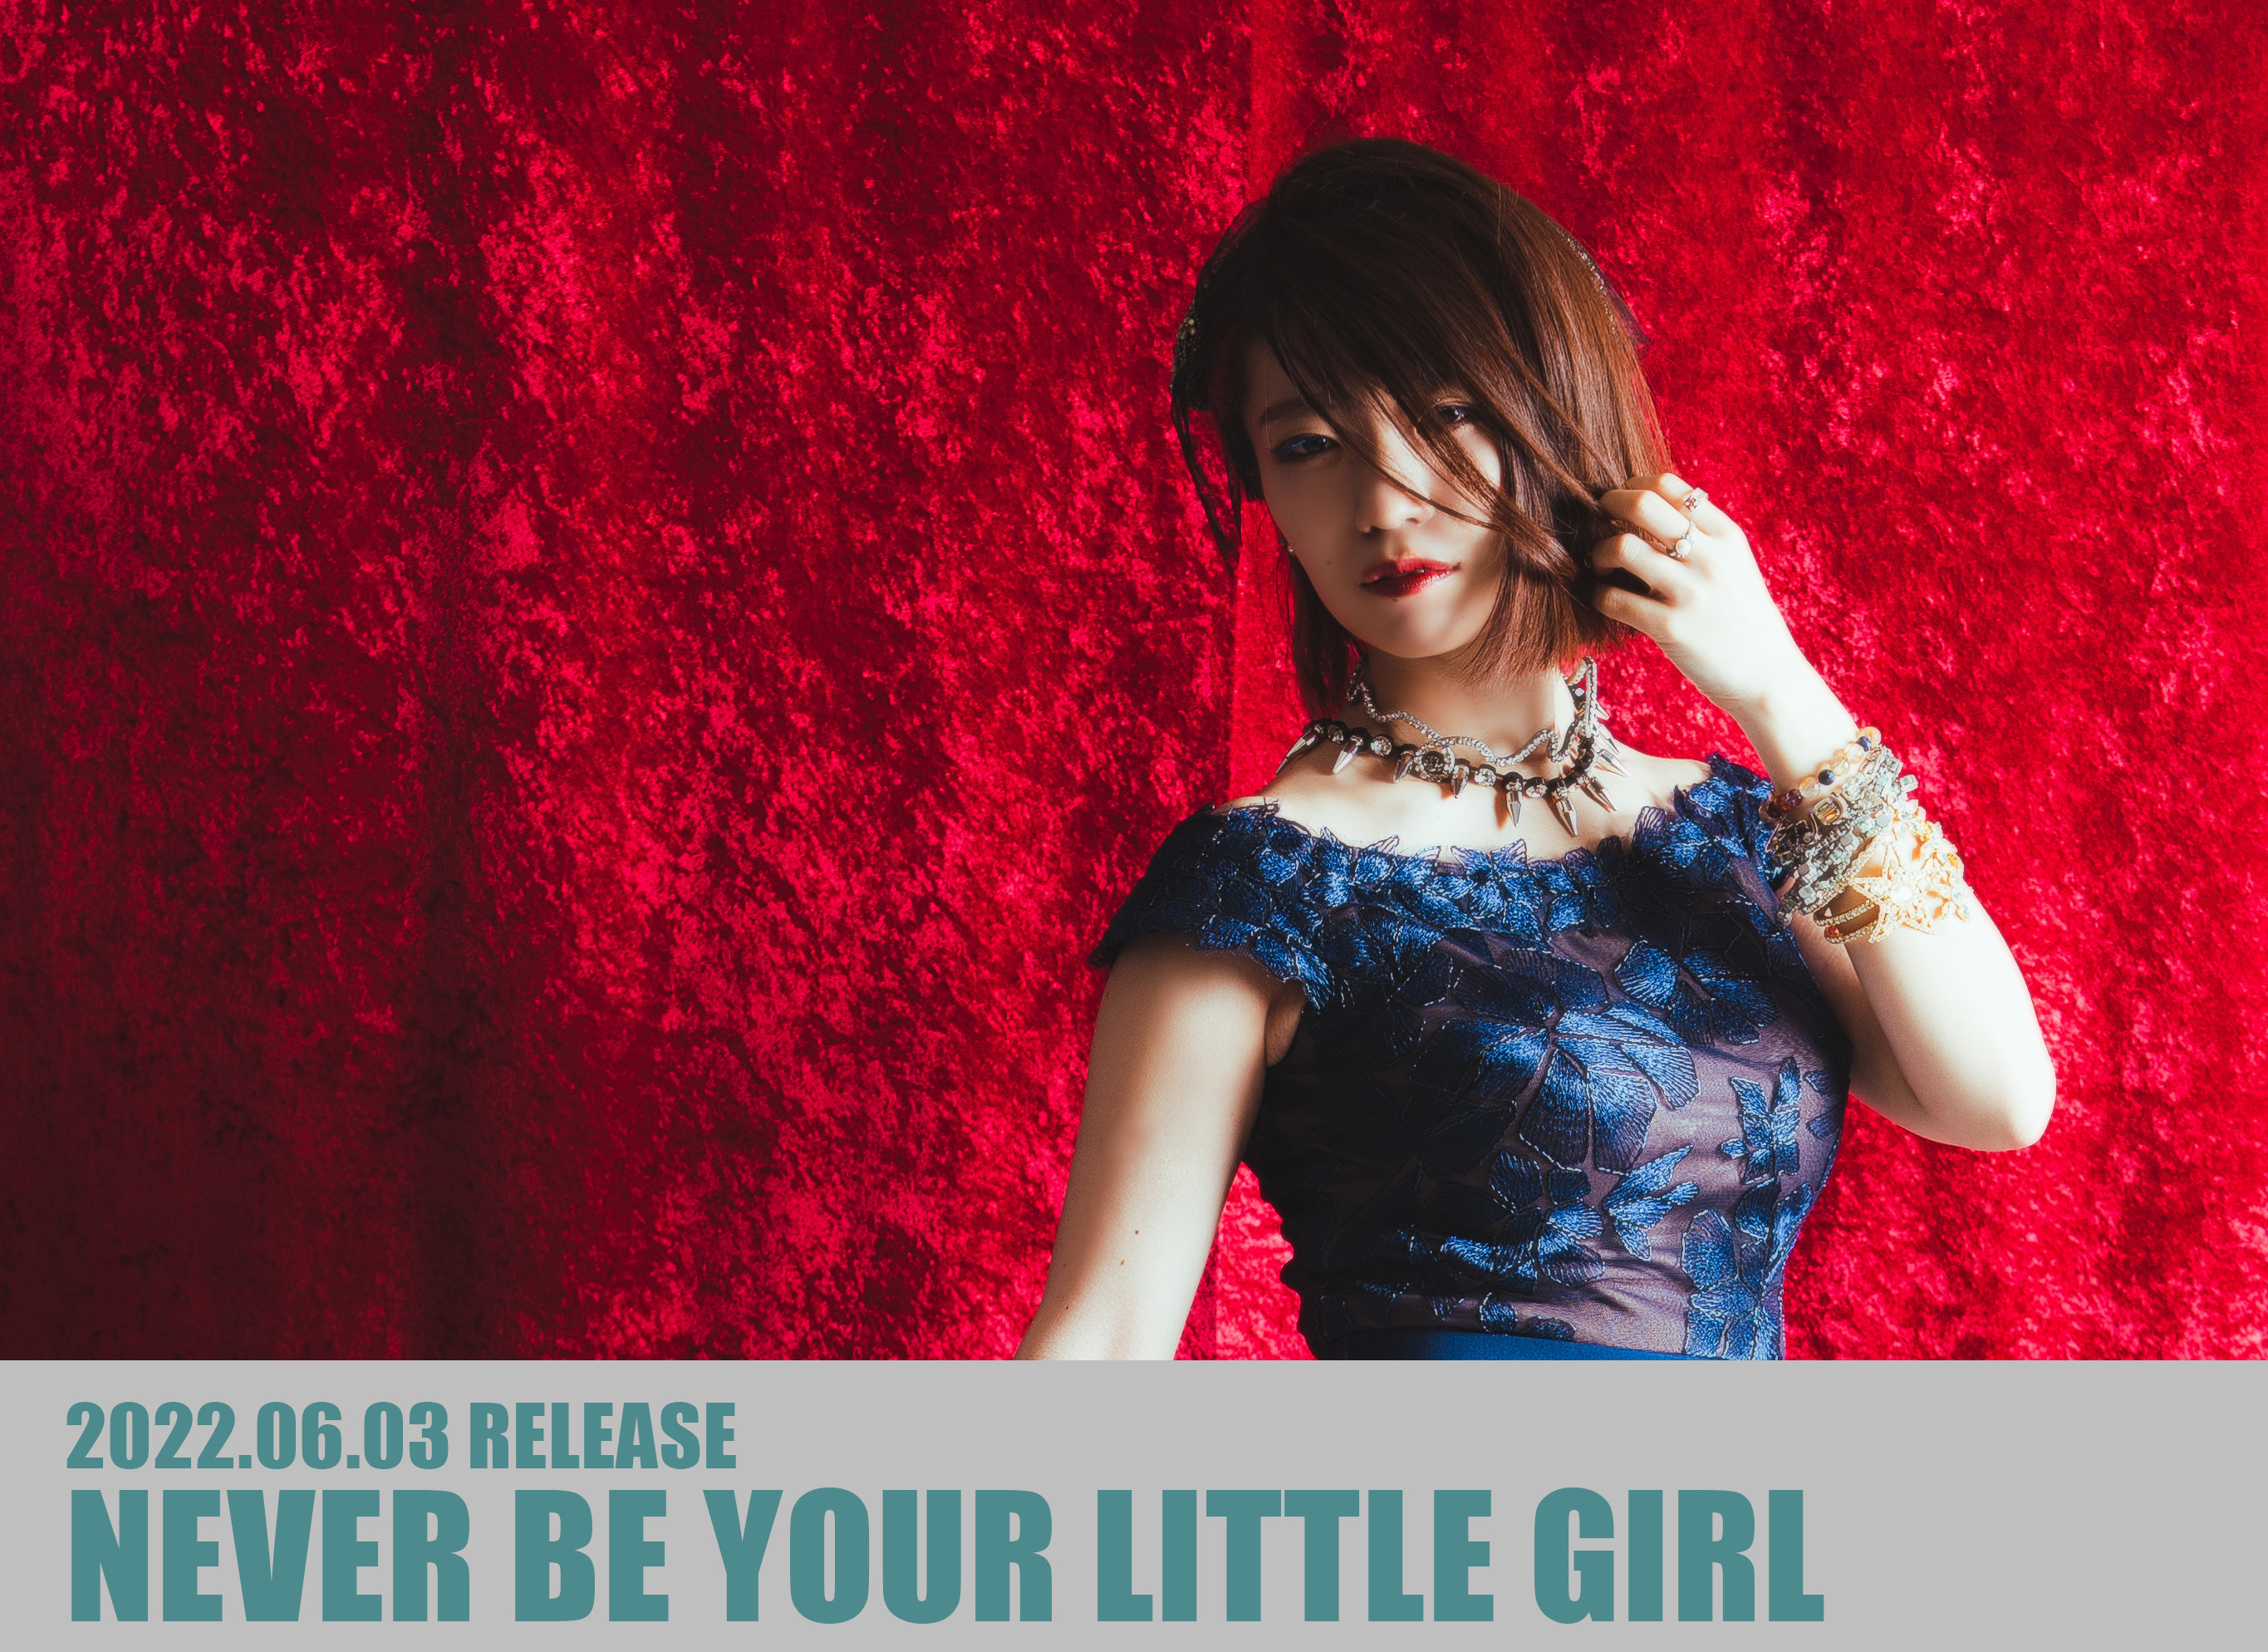 NEVER BE YOUR LITTLE GIRL